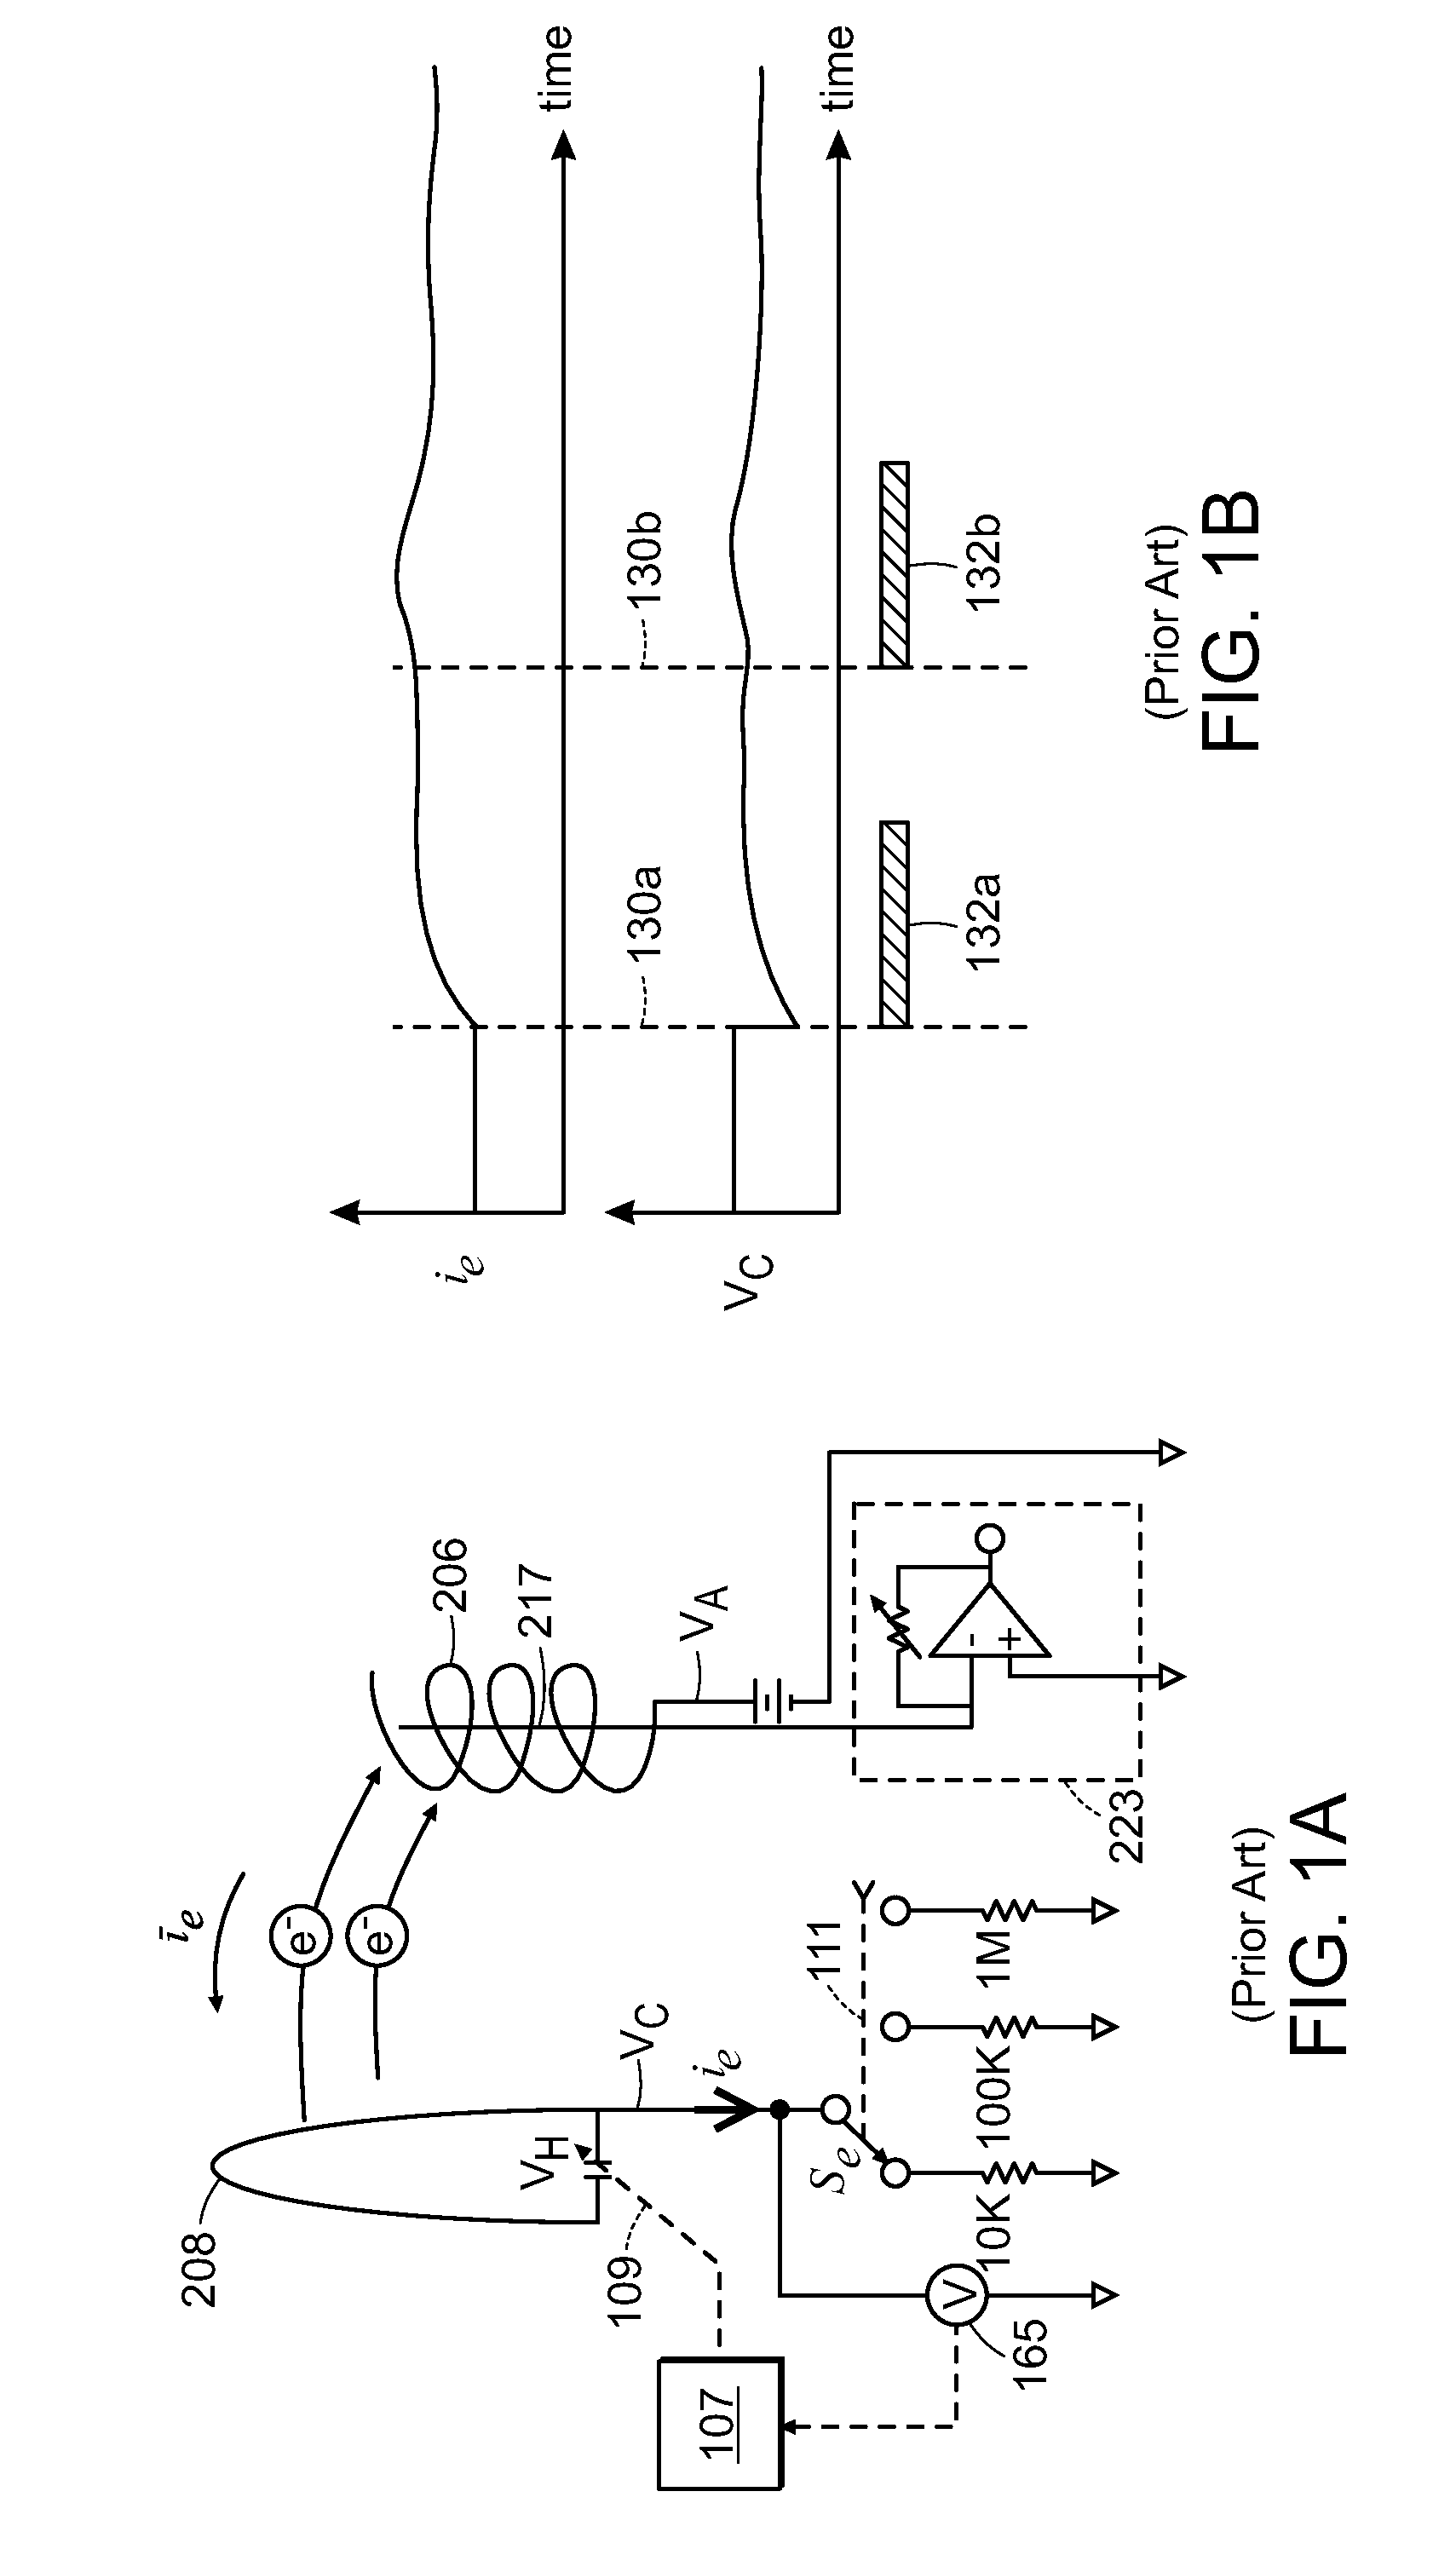 Ionization Pressure Gauge With Bias Voltage And Emission Current Control And Measurement